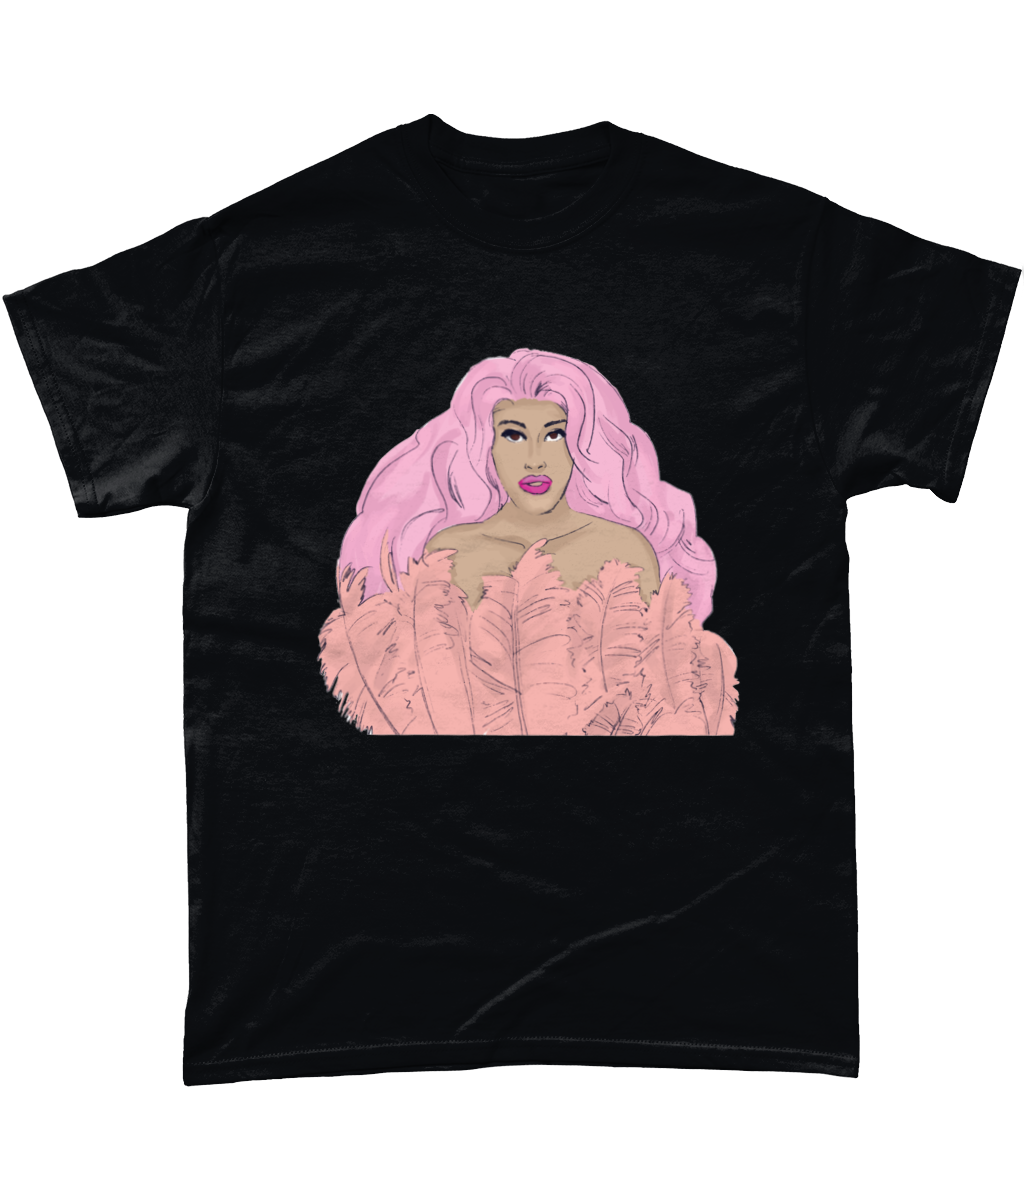 Quanah Style - Cover Cartoon T-Shirt - SNATCHED MERCH